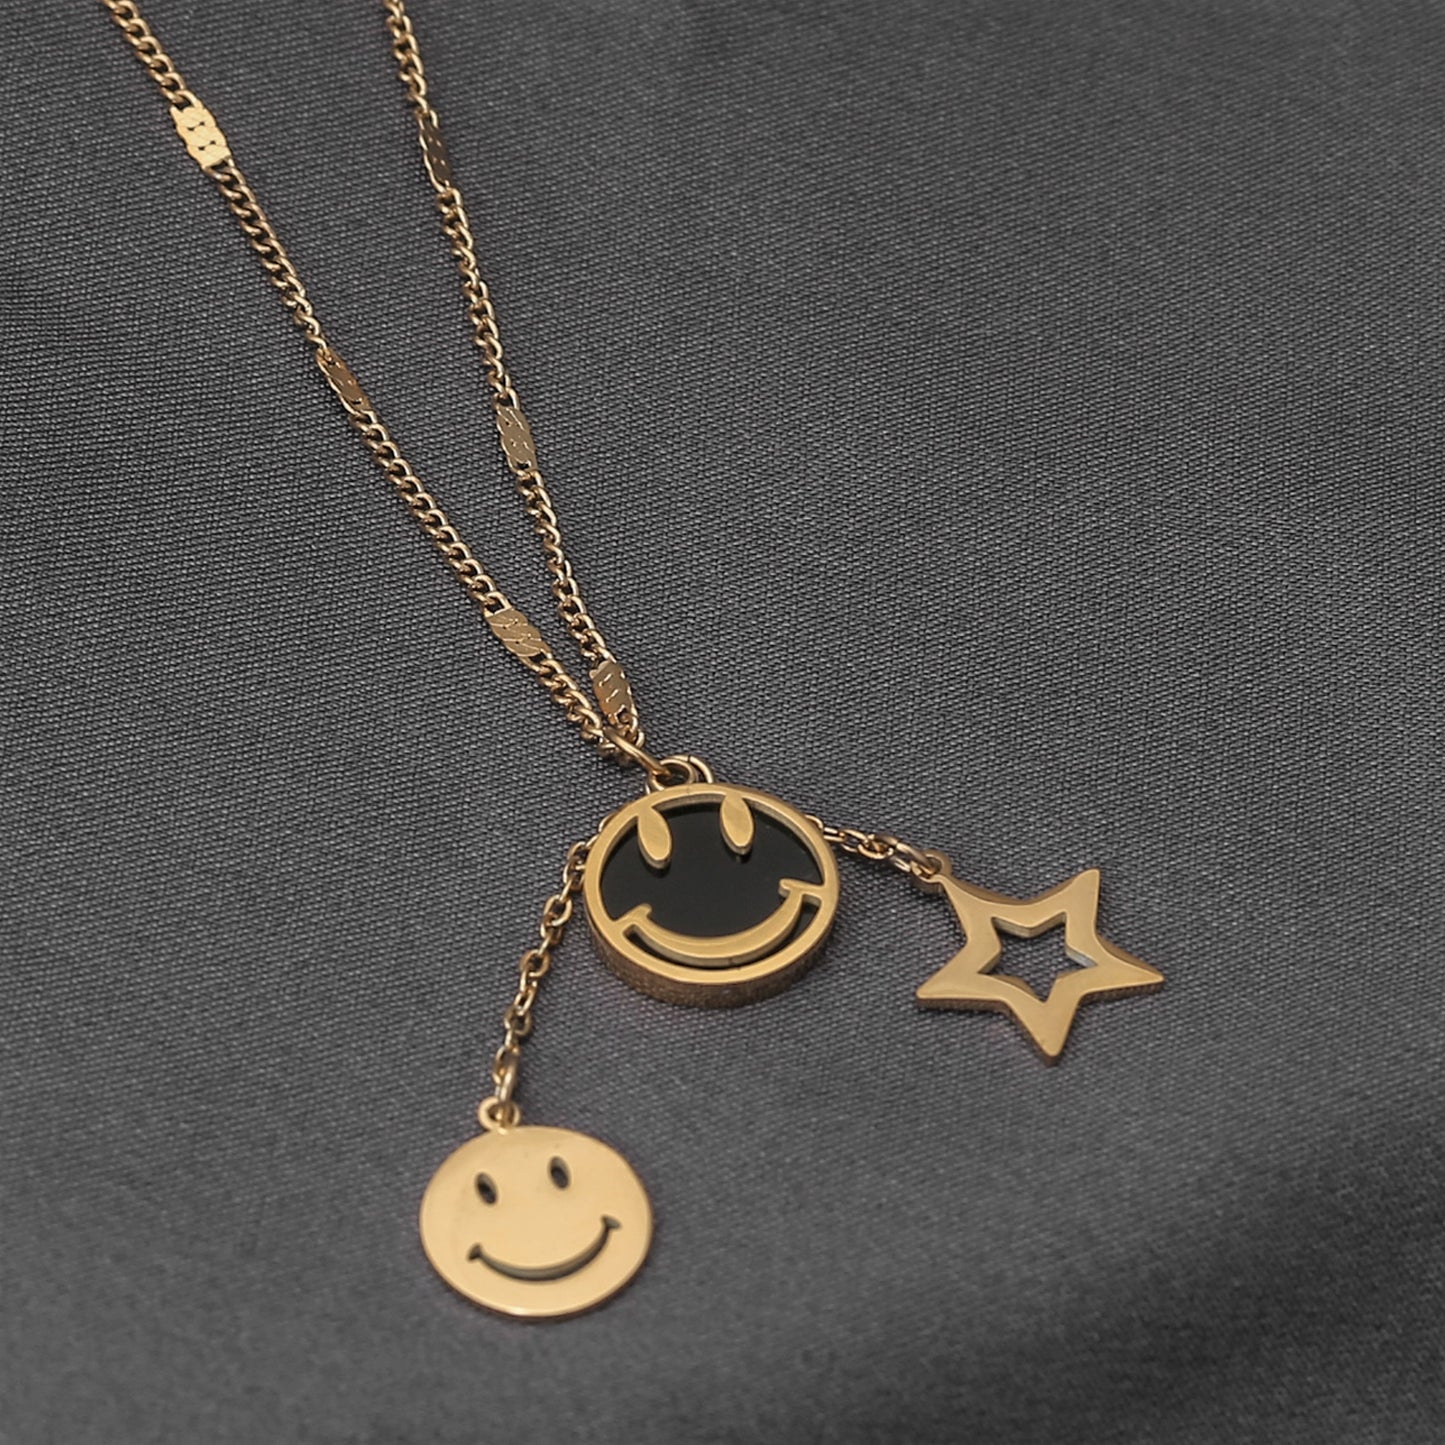 SMILEY GOLD NECKLACE